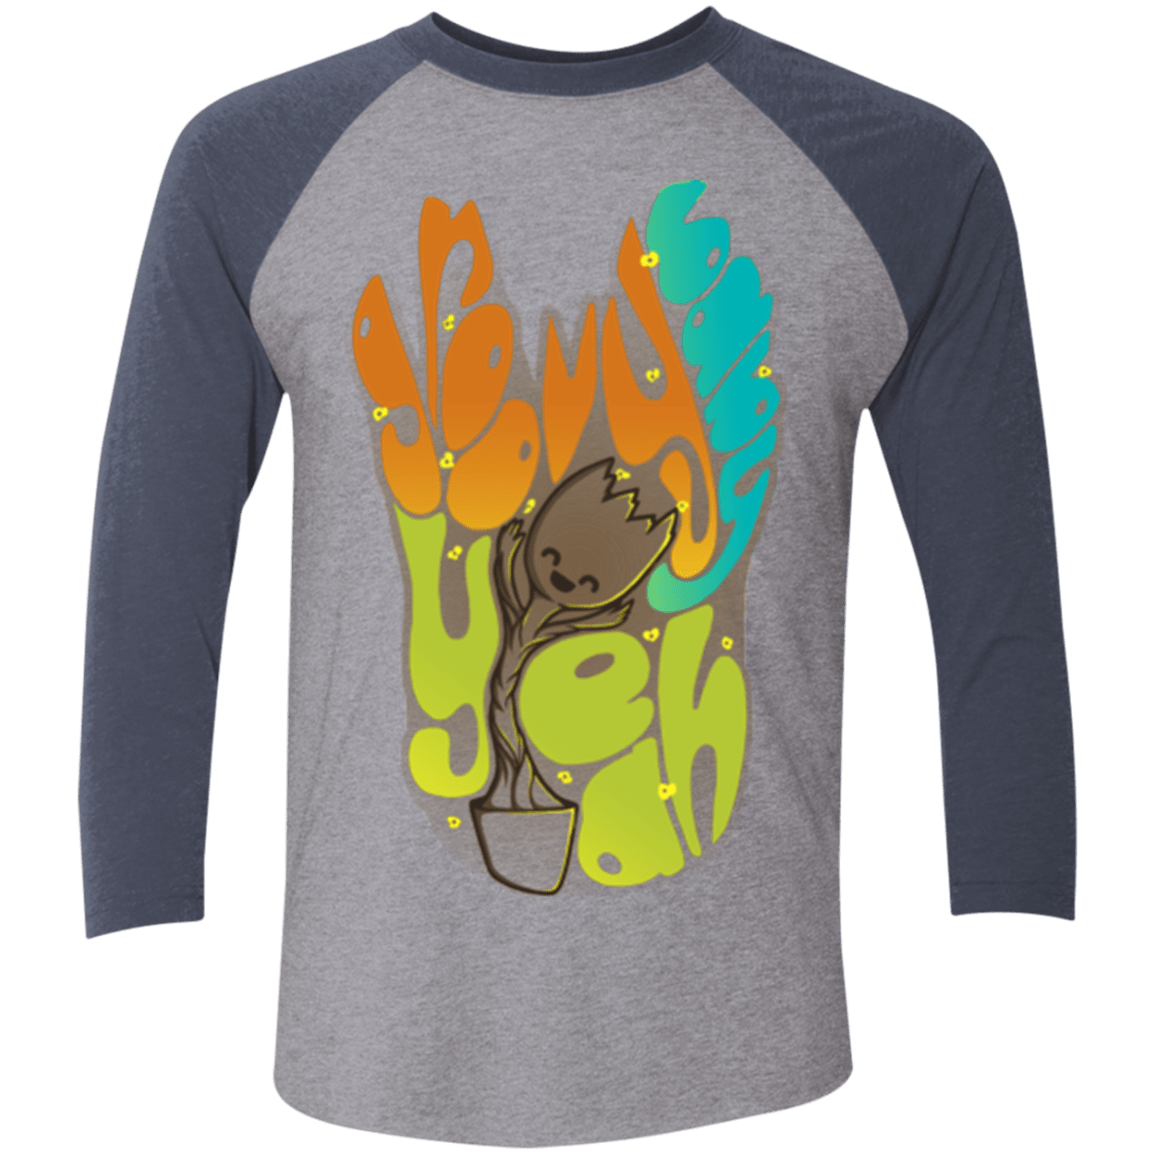 Groovy Baby Triblend 3/4 Sleeve